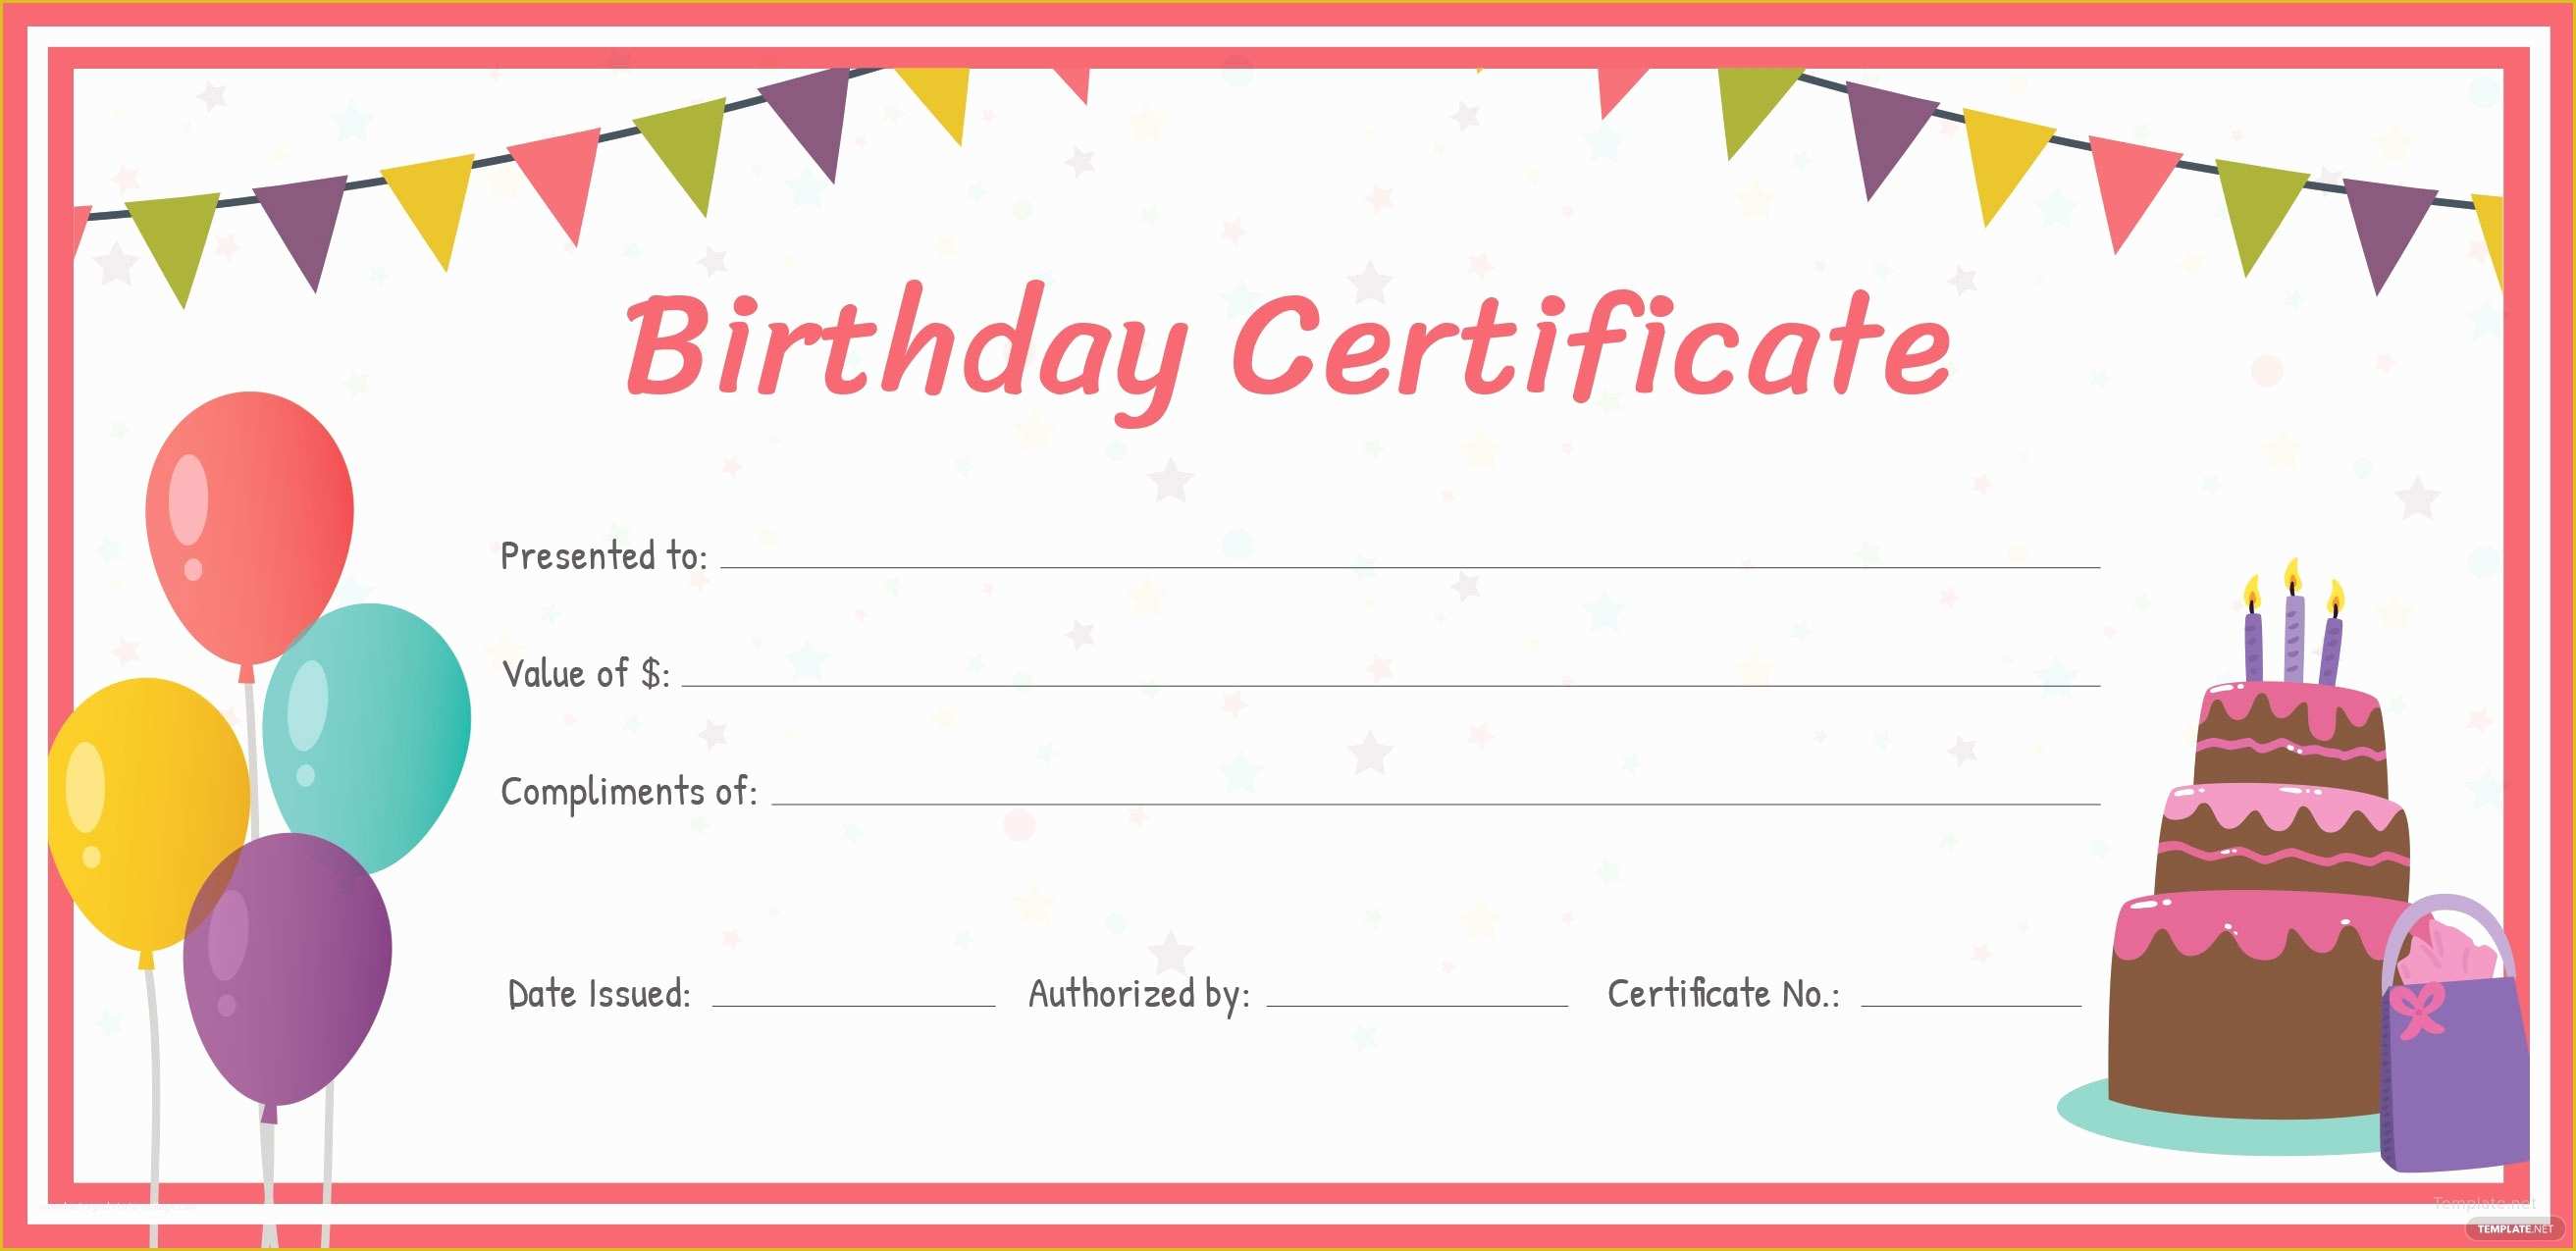 Gift Certificate Template Free Of Free Birthday Gift Certificate Template In Adobe